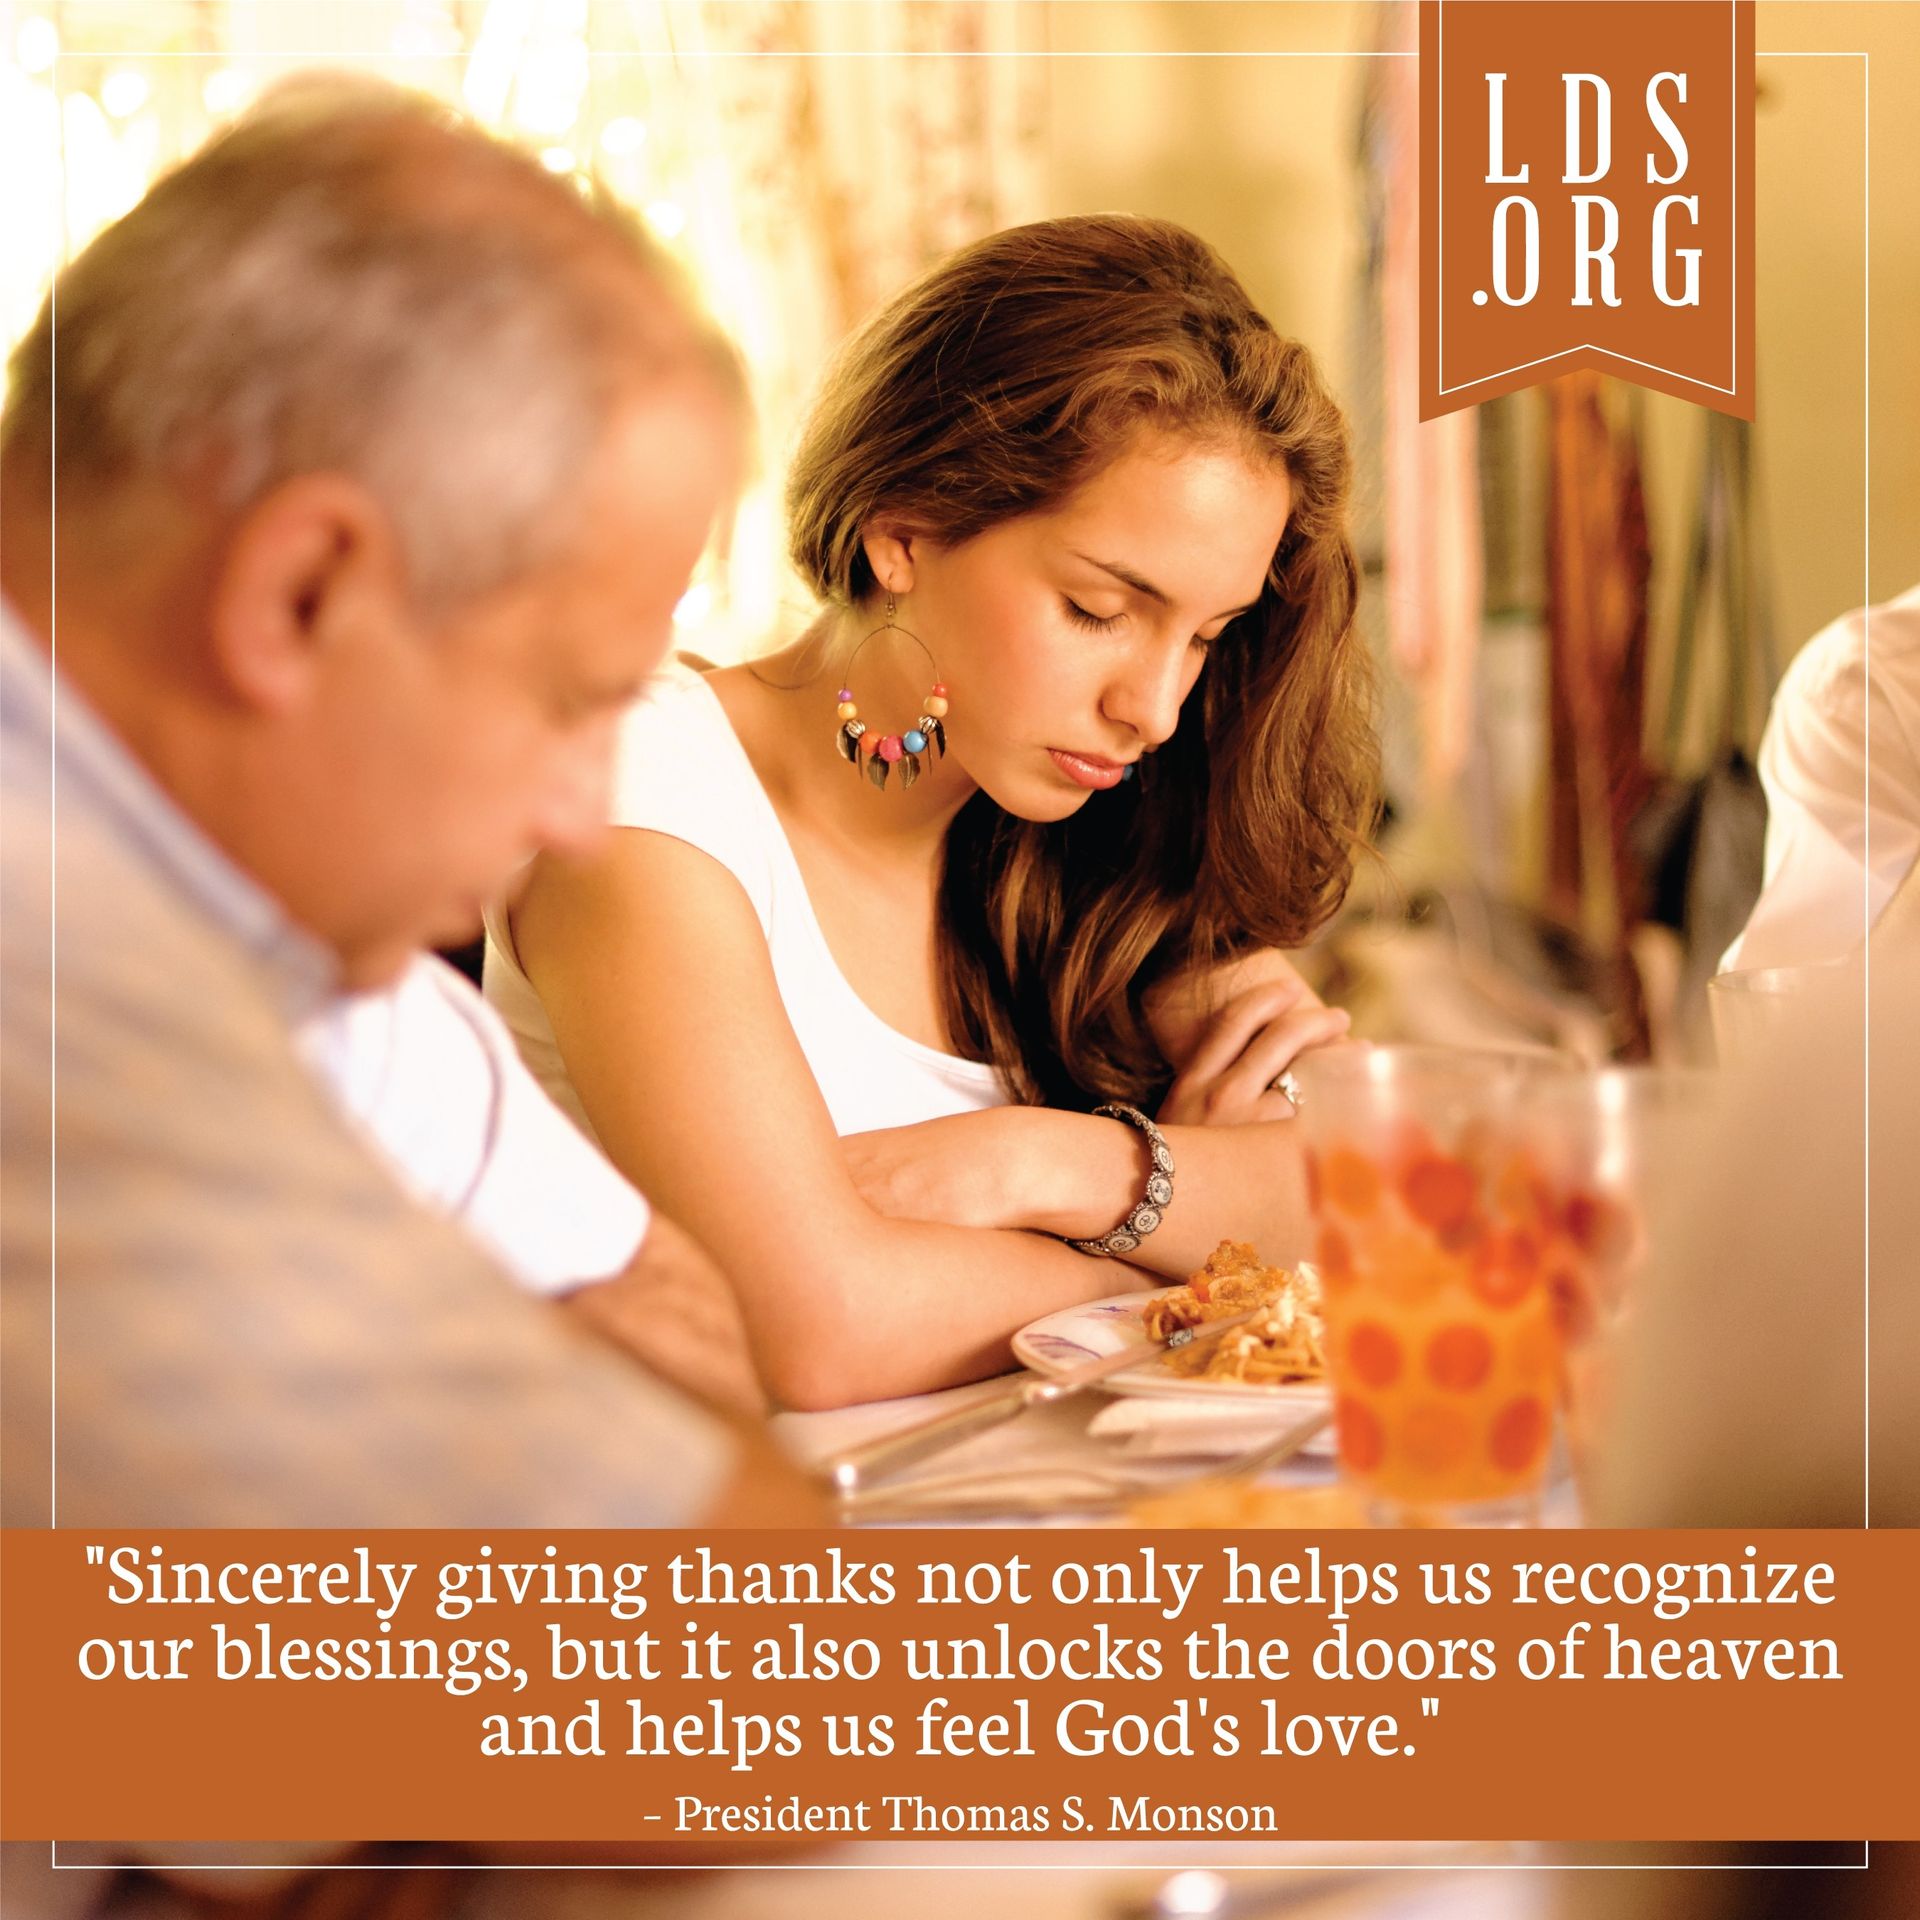 “Sincerely giving thanks not only helps us recognize our blessings, but it also unlocks the doors of heaven and helps us feel God’s love.”—President Thomas S. Monson, “The Divine Gift of Gratitude” © undefined ipCode 1.